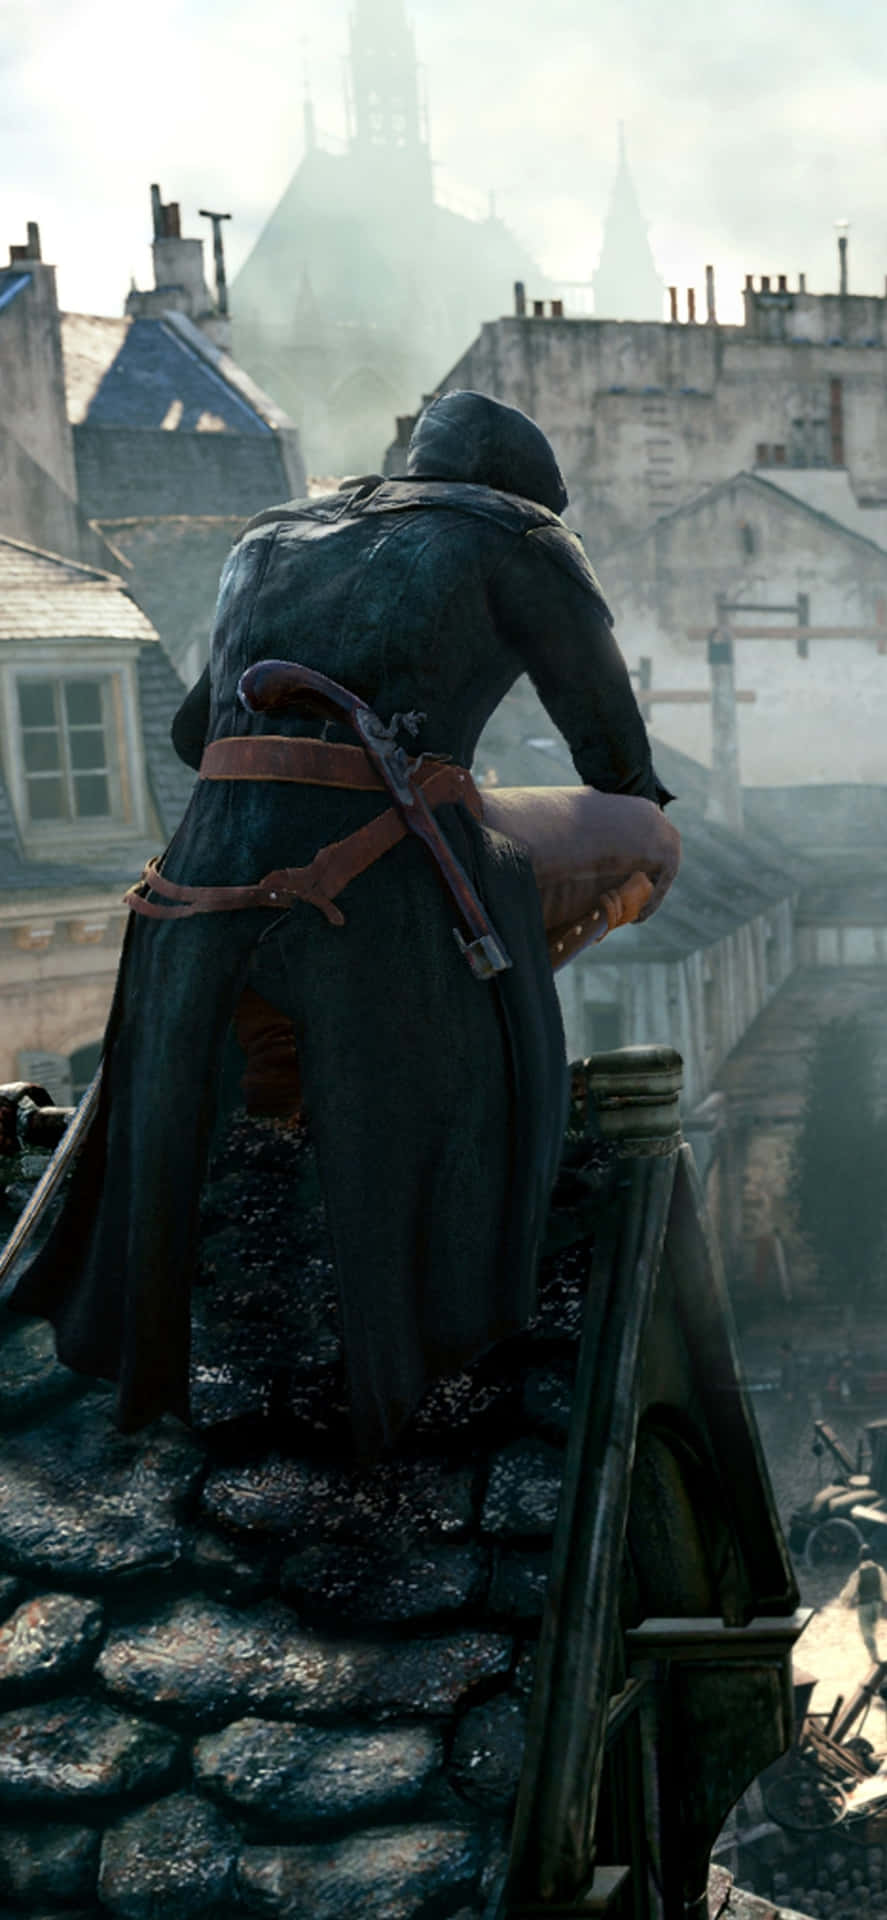 Assassin's Creed Unity protagonist Arno Dorian in the streets of Paris Wallpaper